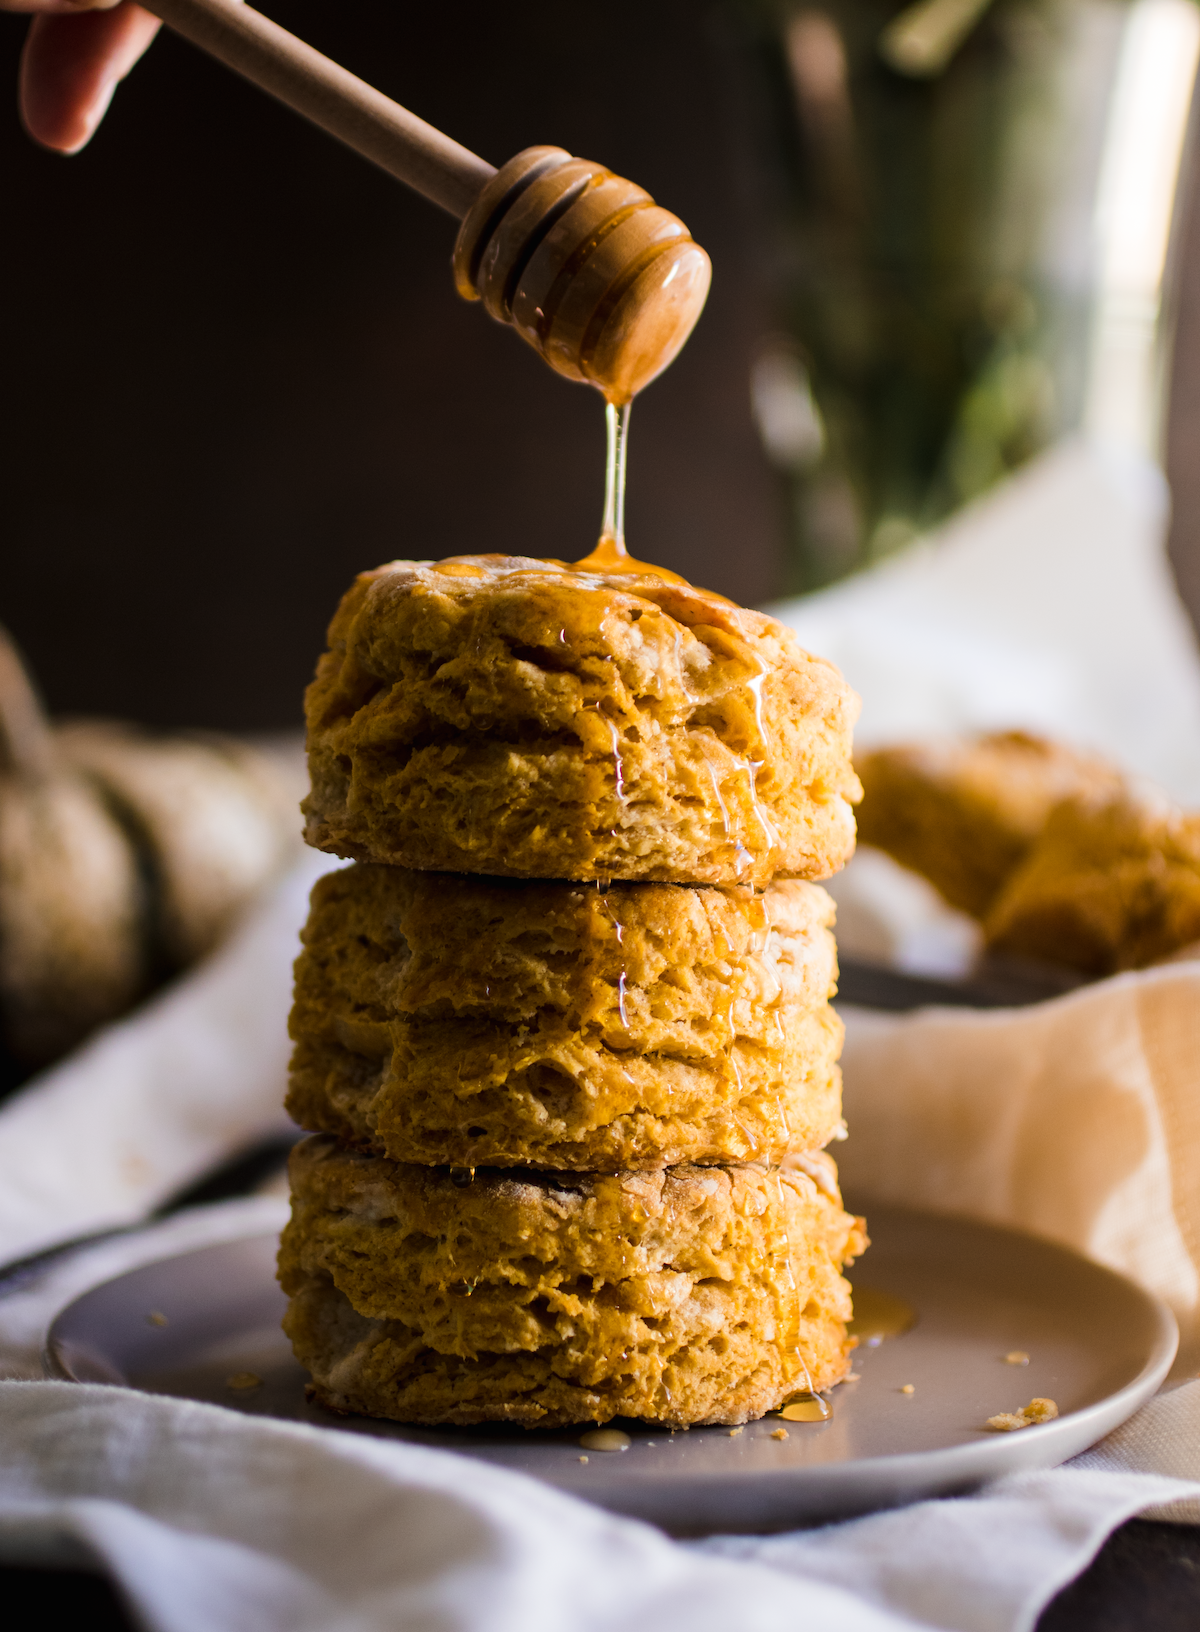 Honey dipper drizzling honey over a stack of pumpkin biscuits in front of a dark background.